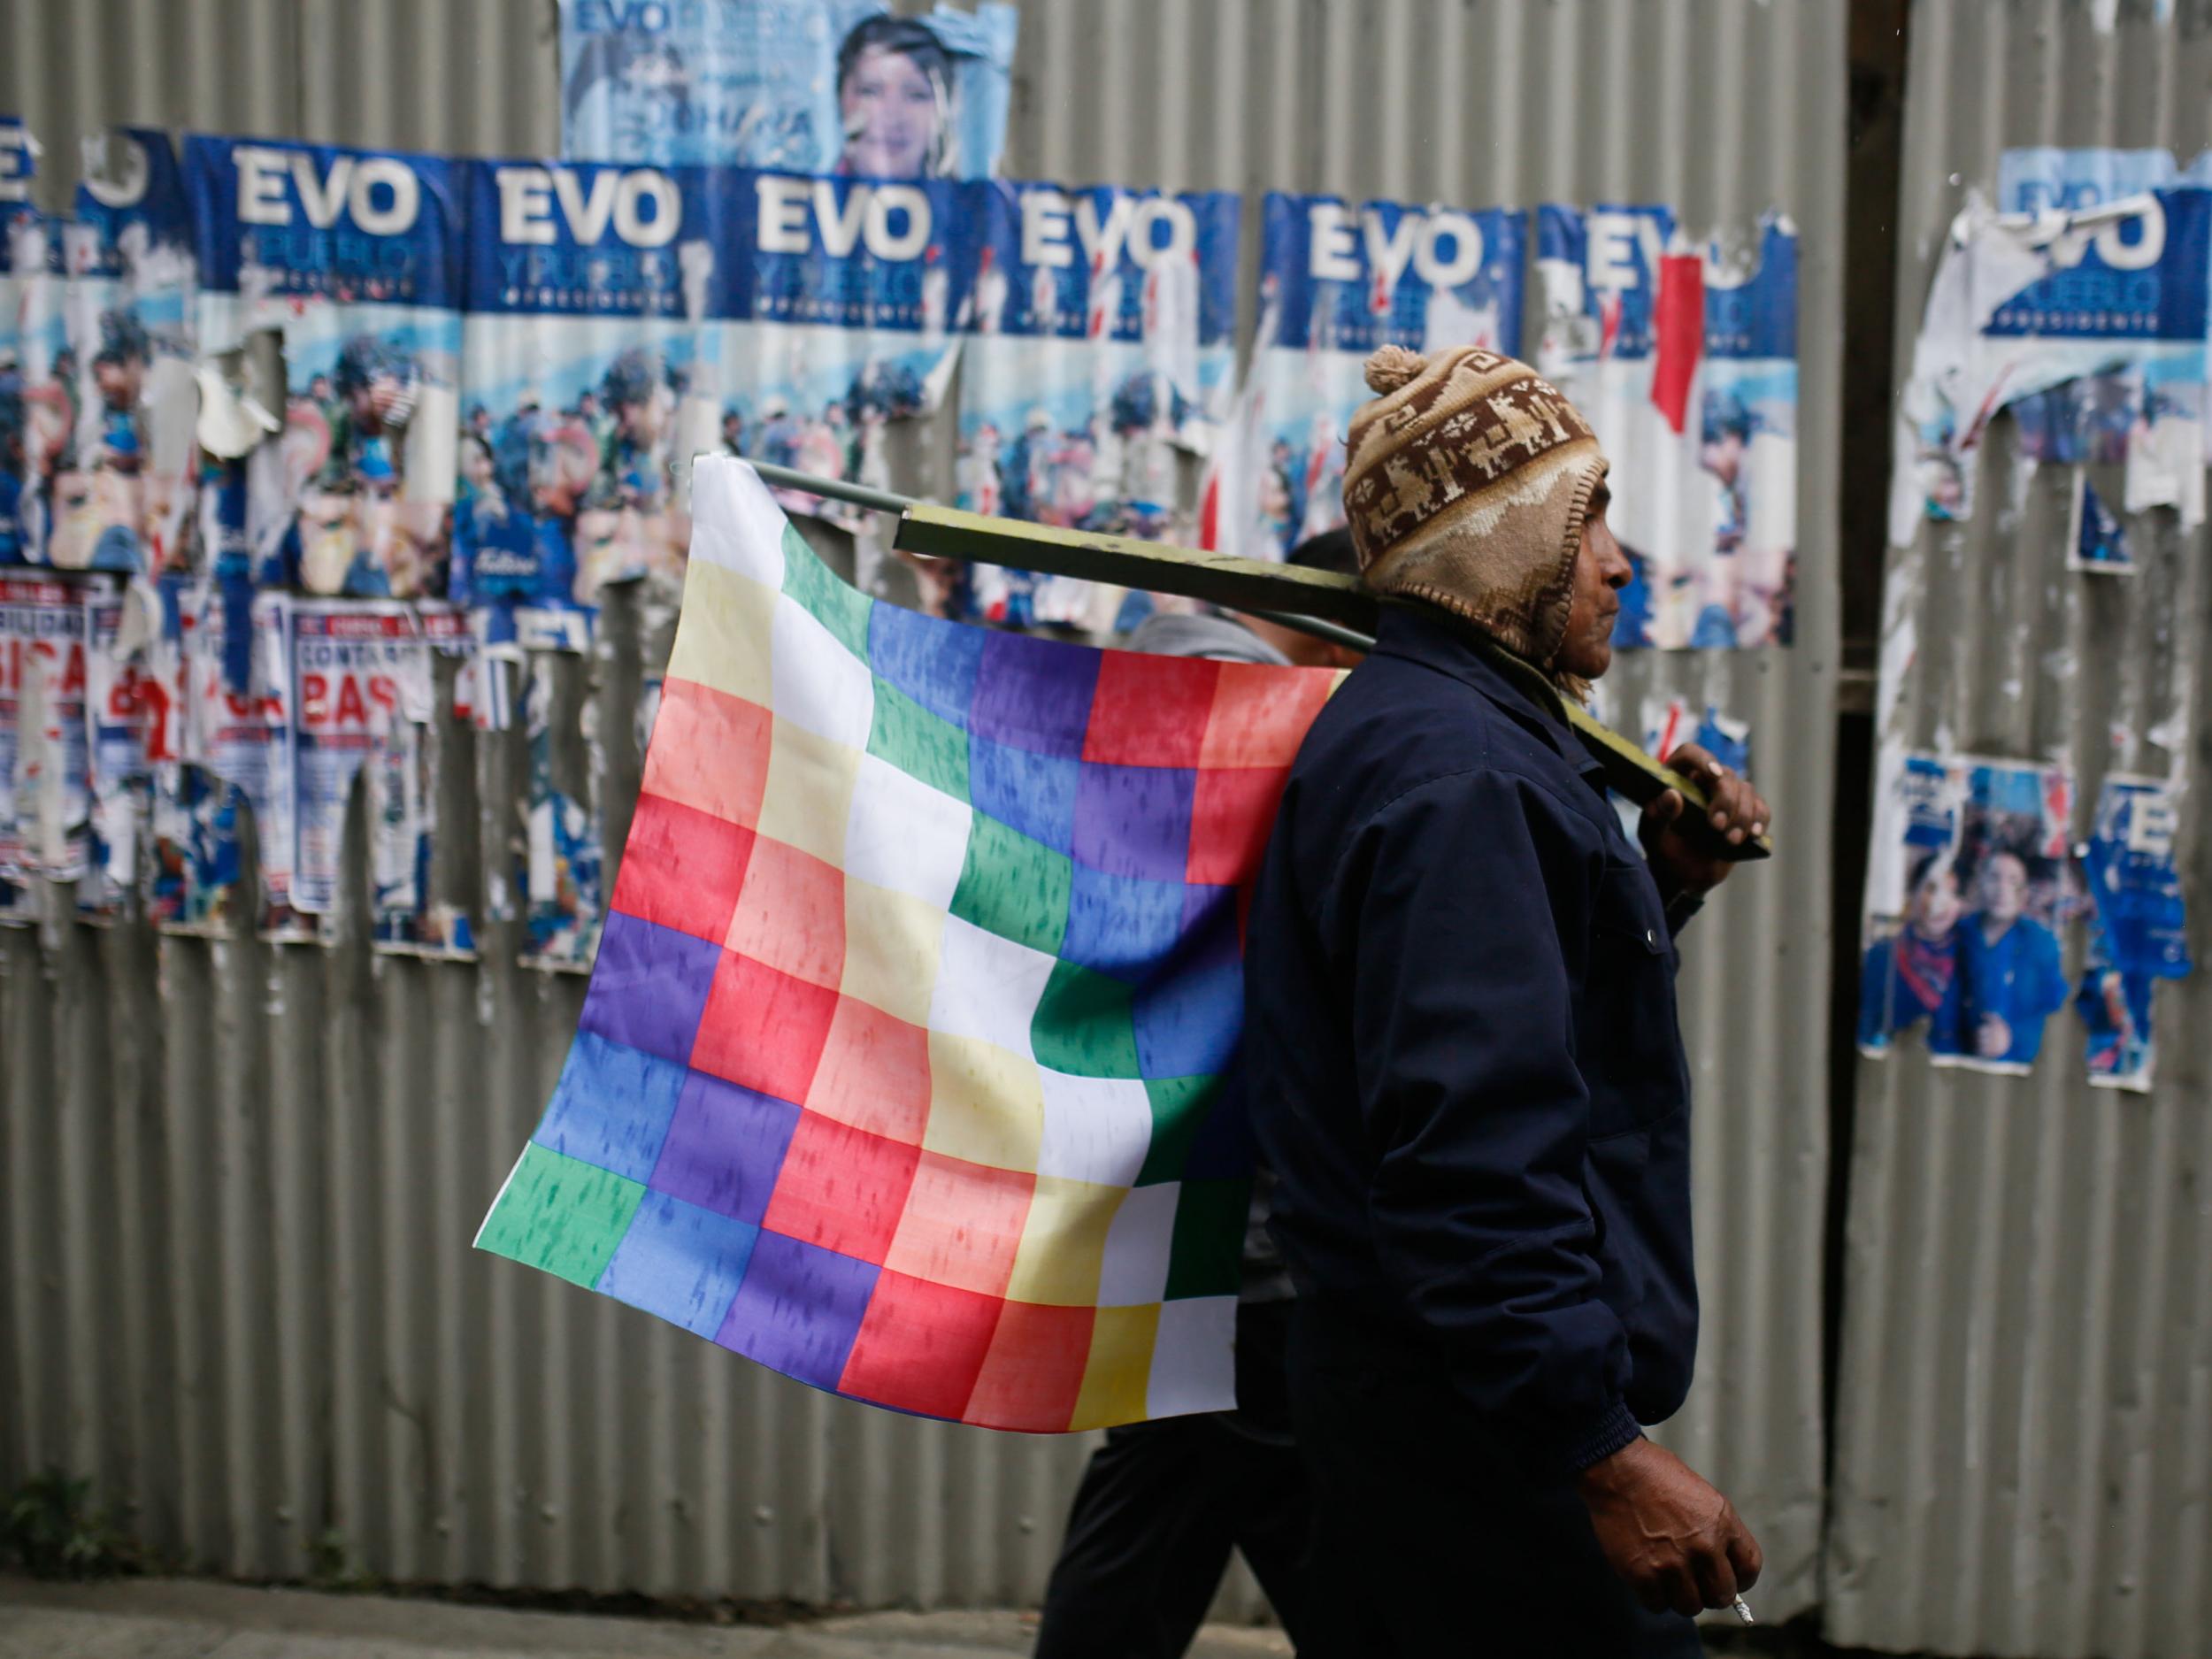 A supporter of Evo walks with a Wiphala flag during a La Paz protest